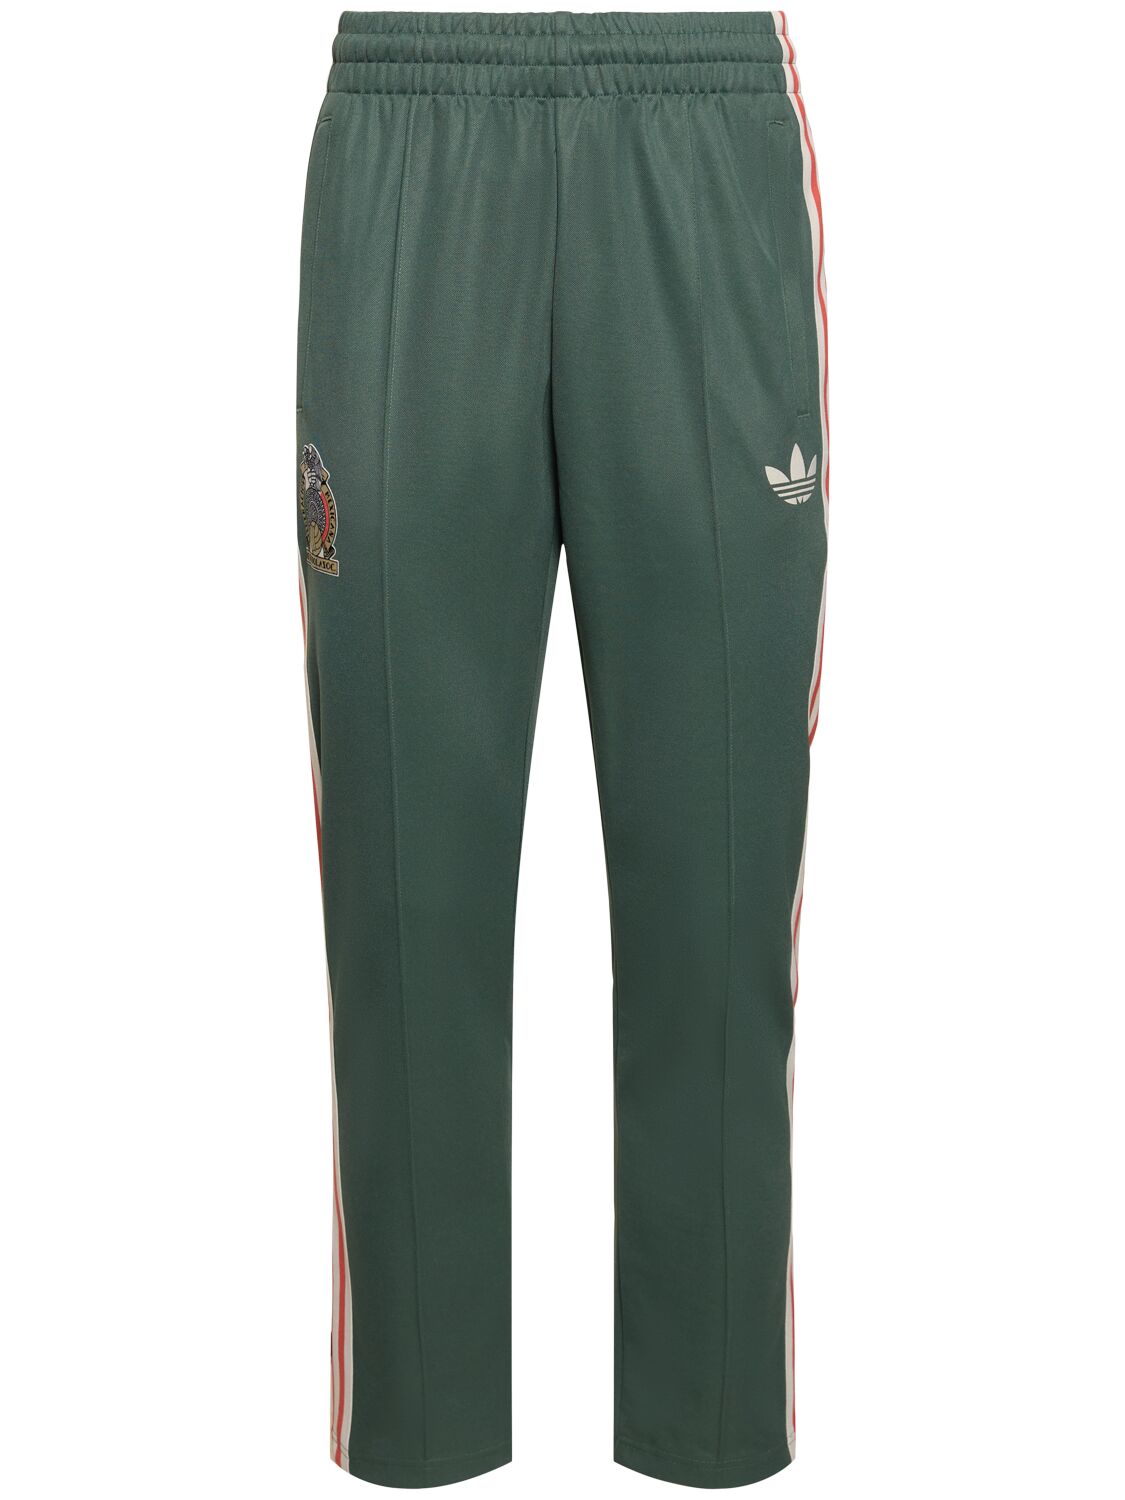 Adidas Originals Mexico Track Pants In Green Oxide